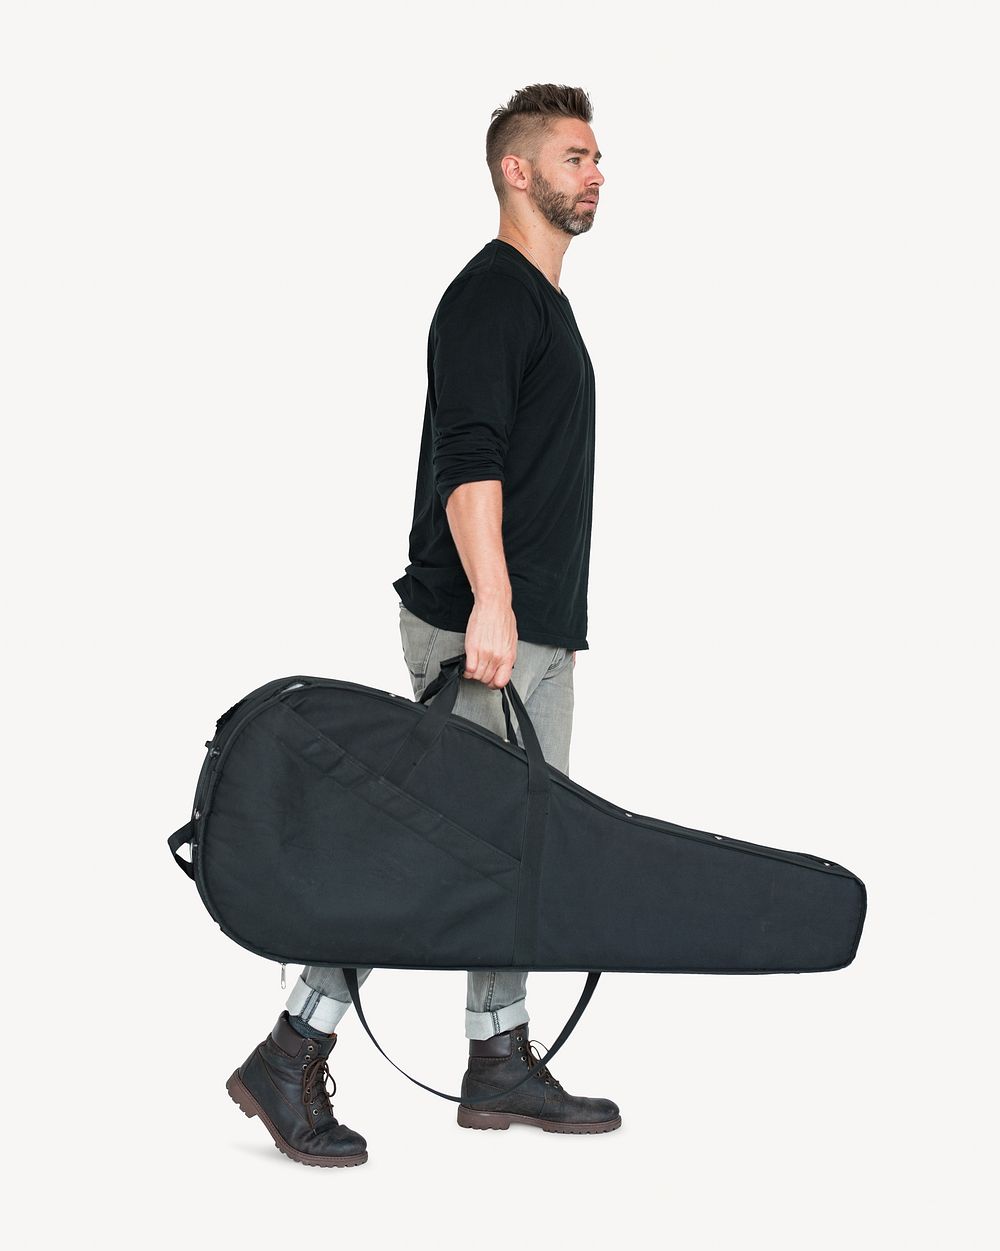 Man carrying guitar case, isolated image